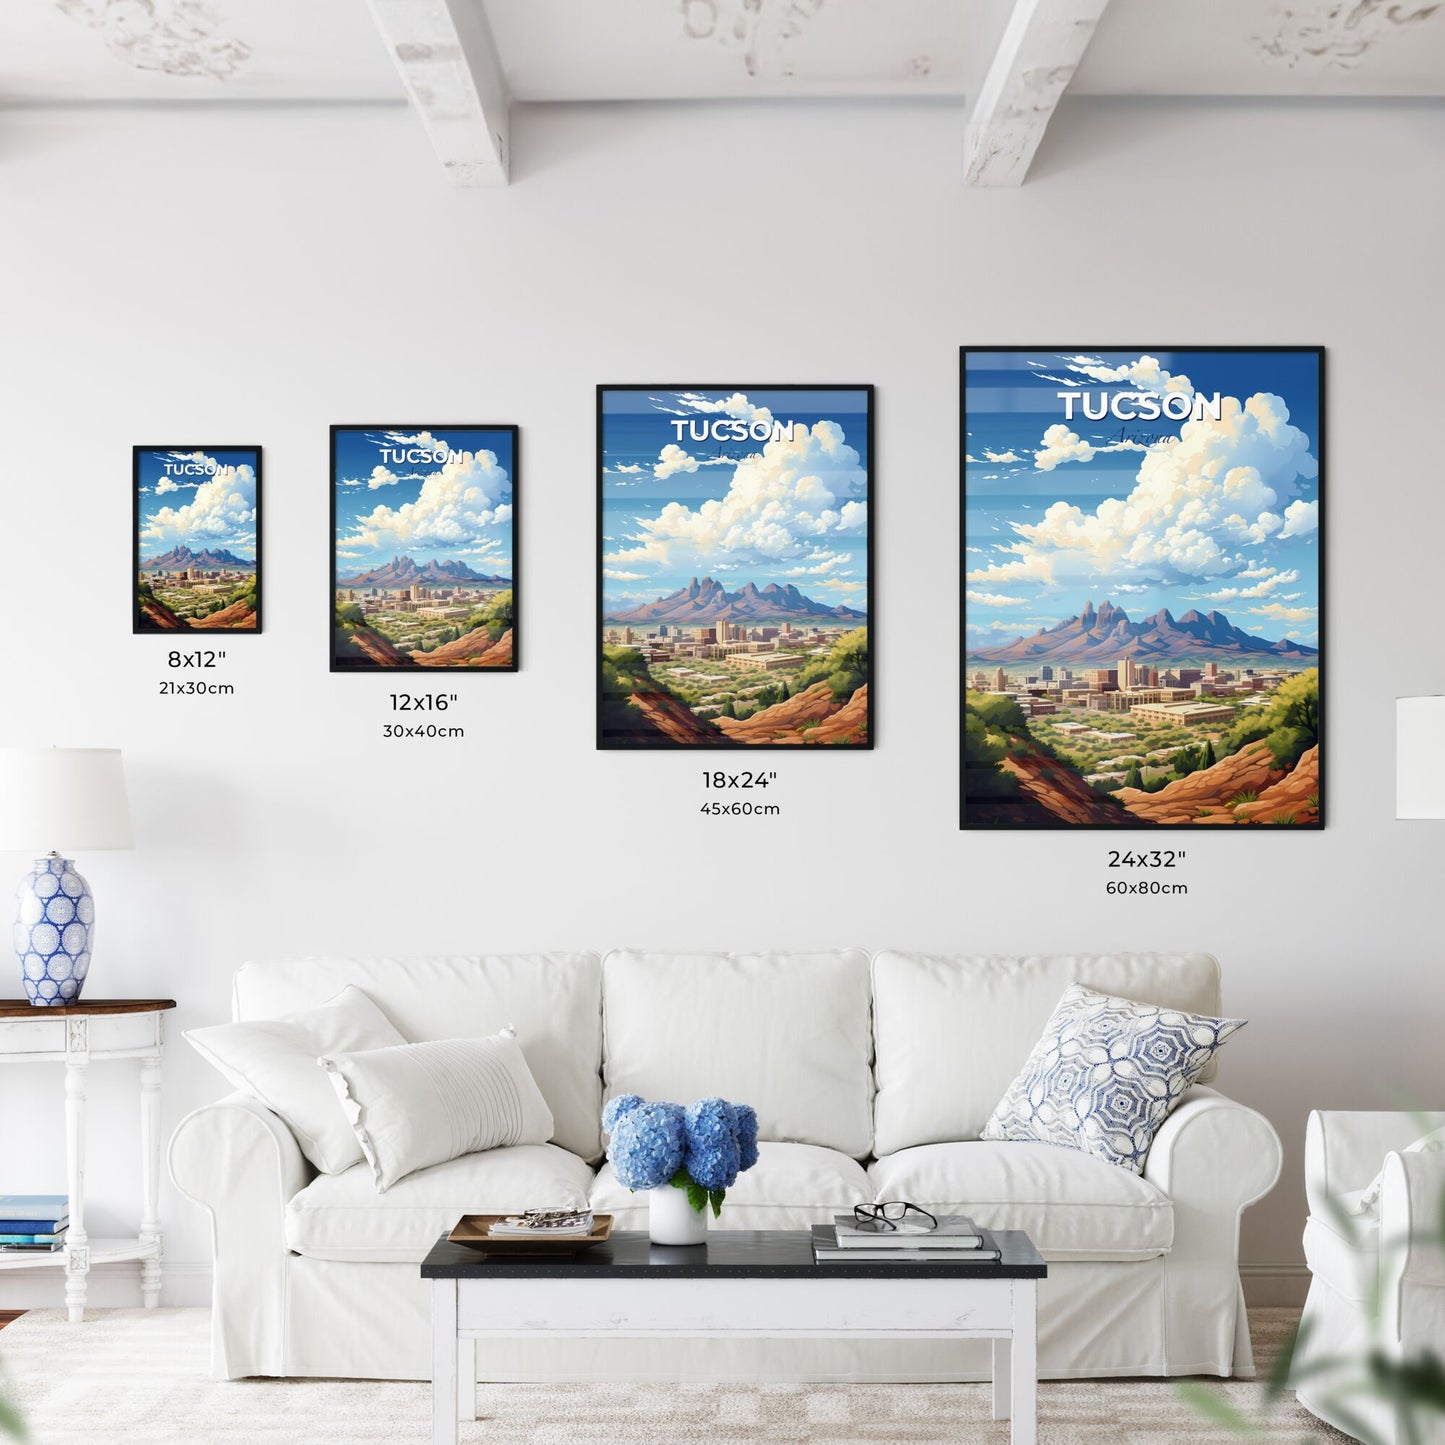 Tucson Arizona Skyline - A Landscape Of A City With Mountains In The Background - Customizable Travel Gift Default Title